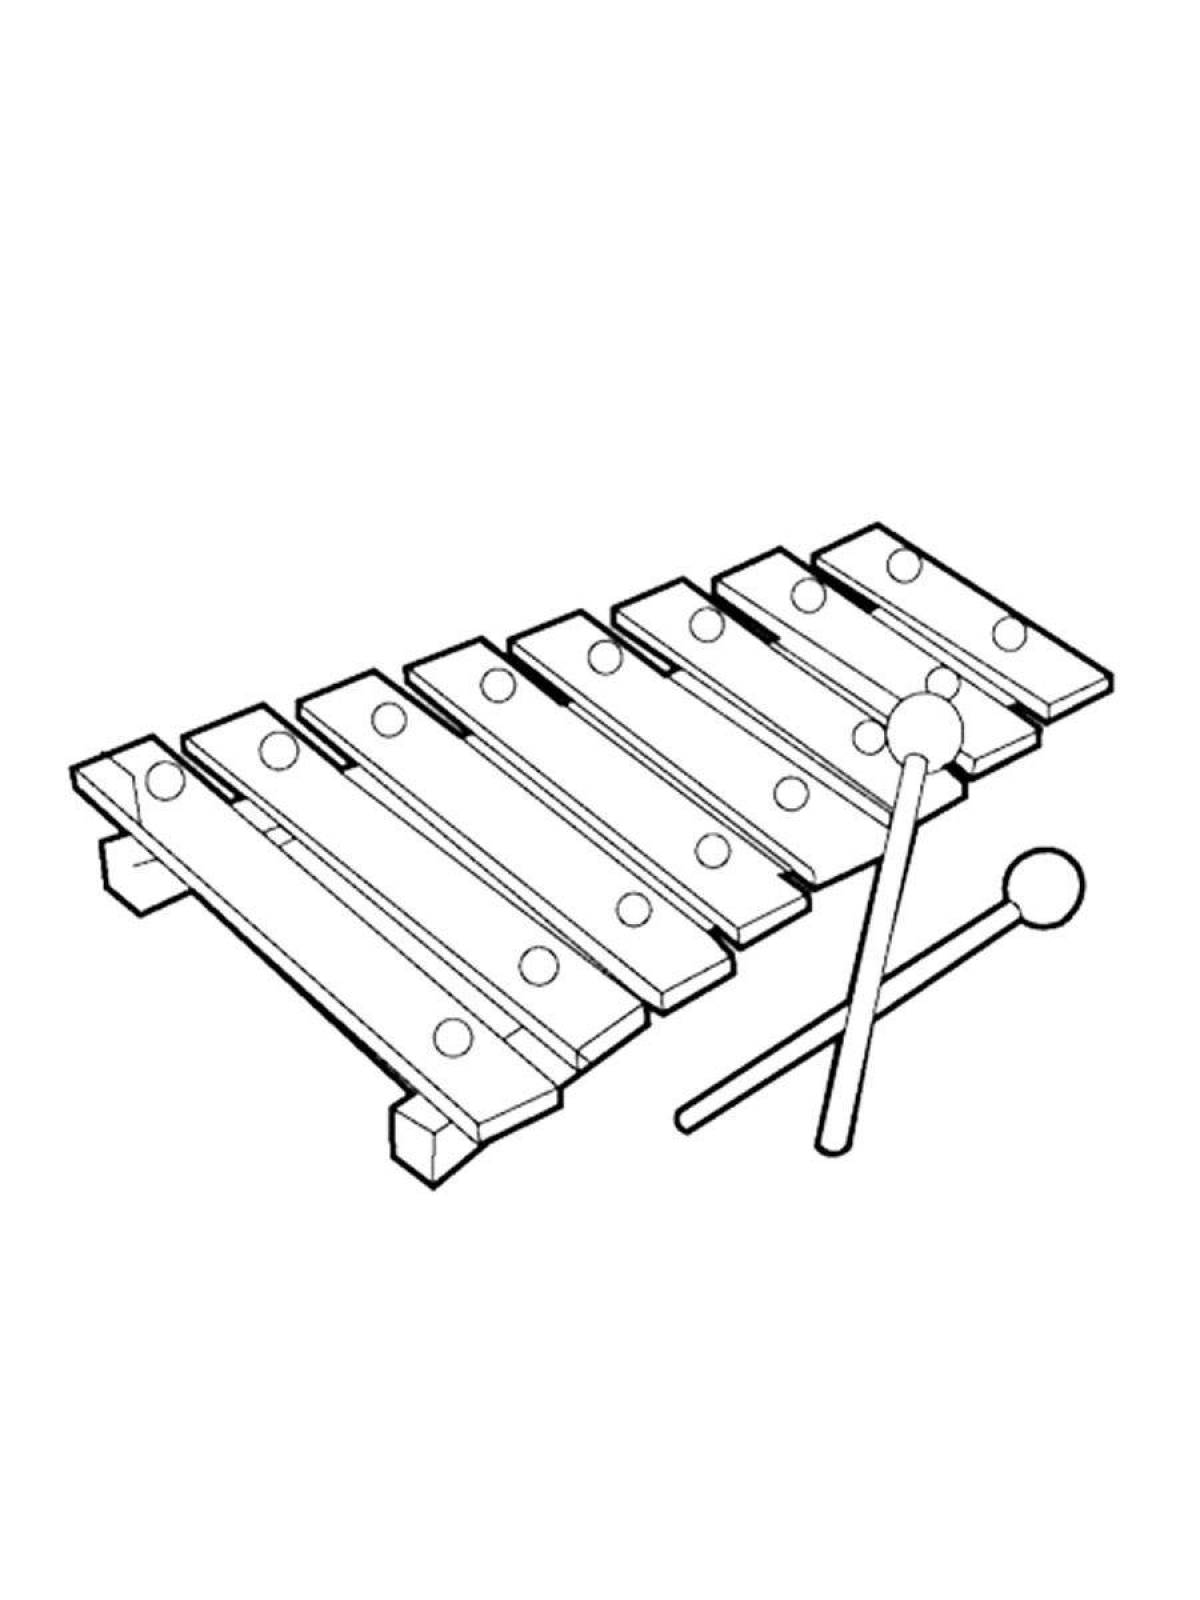 Amazing Xylophone Coloring Page